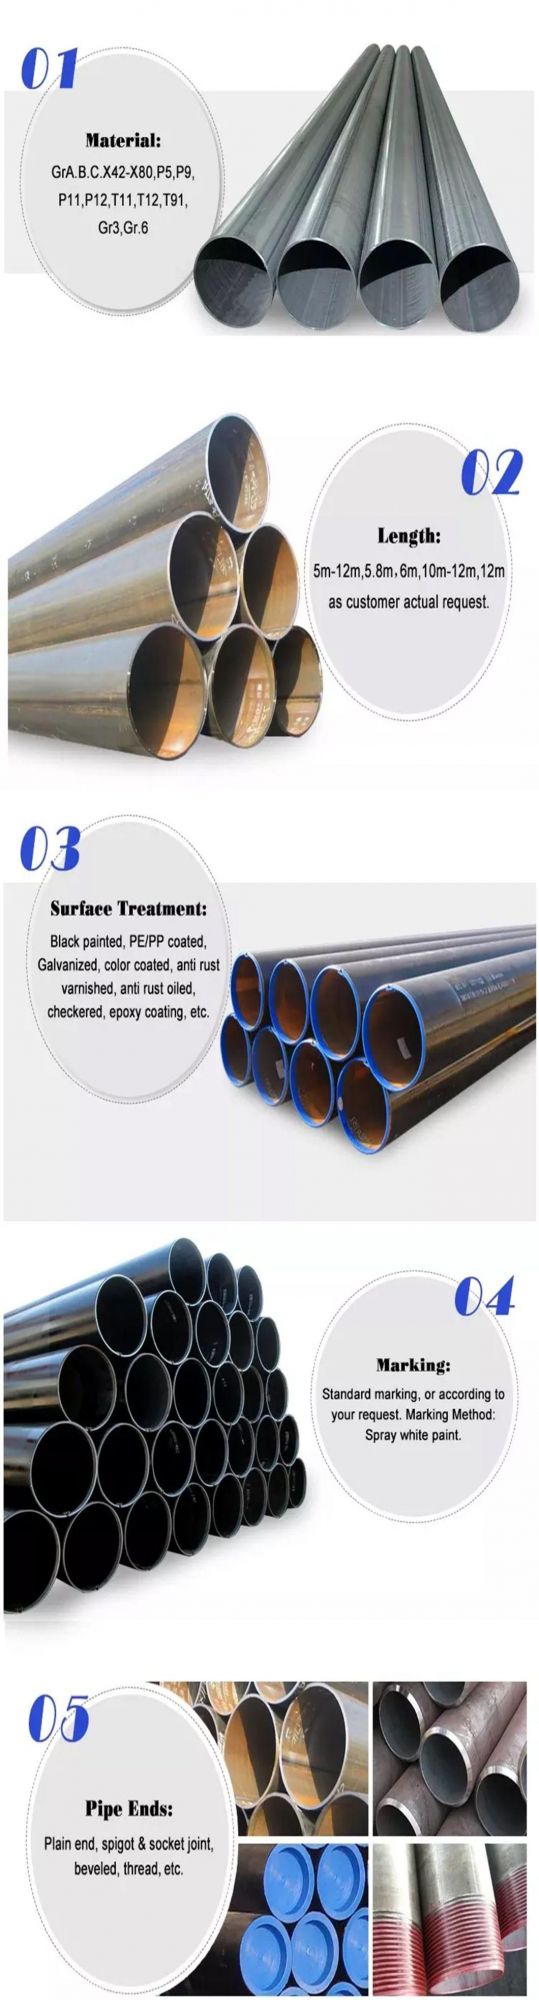 Carbon Steel Seamless Pipe Price Per Meter Sch40 400mm Diameter 20 mm Thick ASTM A50 Pre Galvanized Steel Pipe